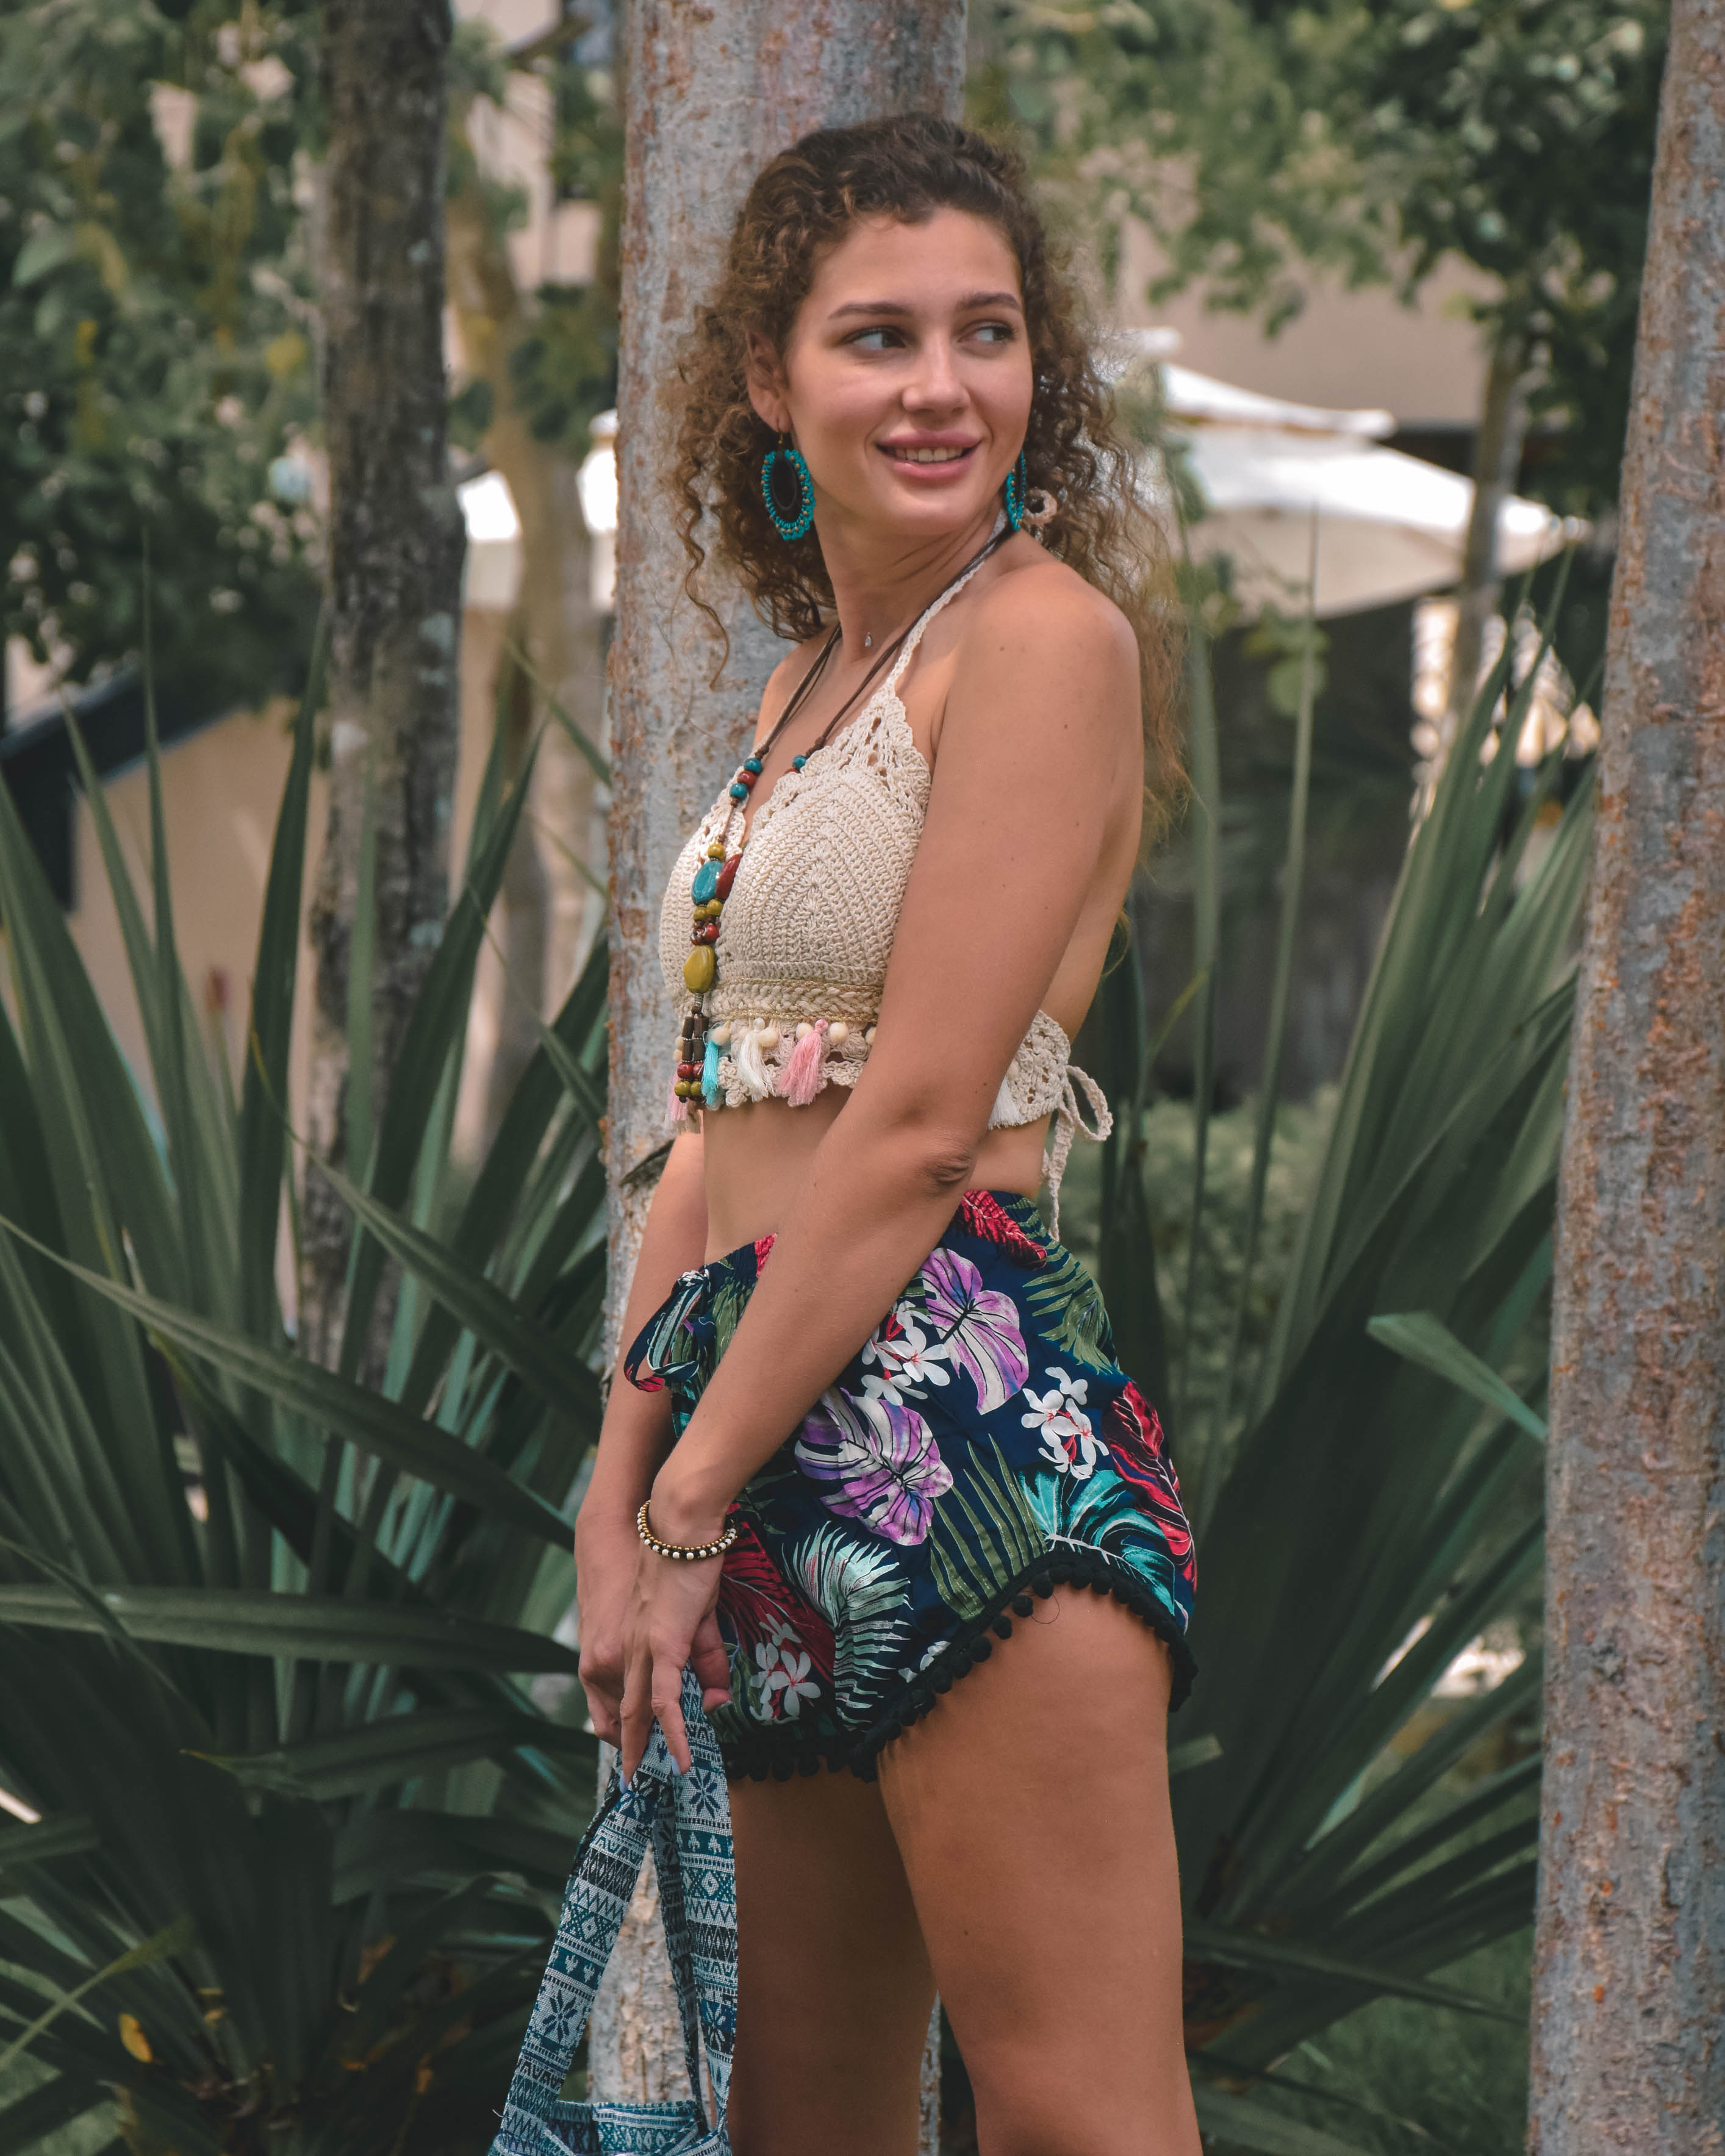 FLORAL SHORTS Elepanta Women's Shorts - Buy Today Elephant Pants Jewelry And Bohemian Clothes Handmade In Thailand Help To Save The Elephants FairTrade And Vegan